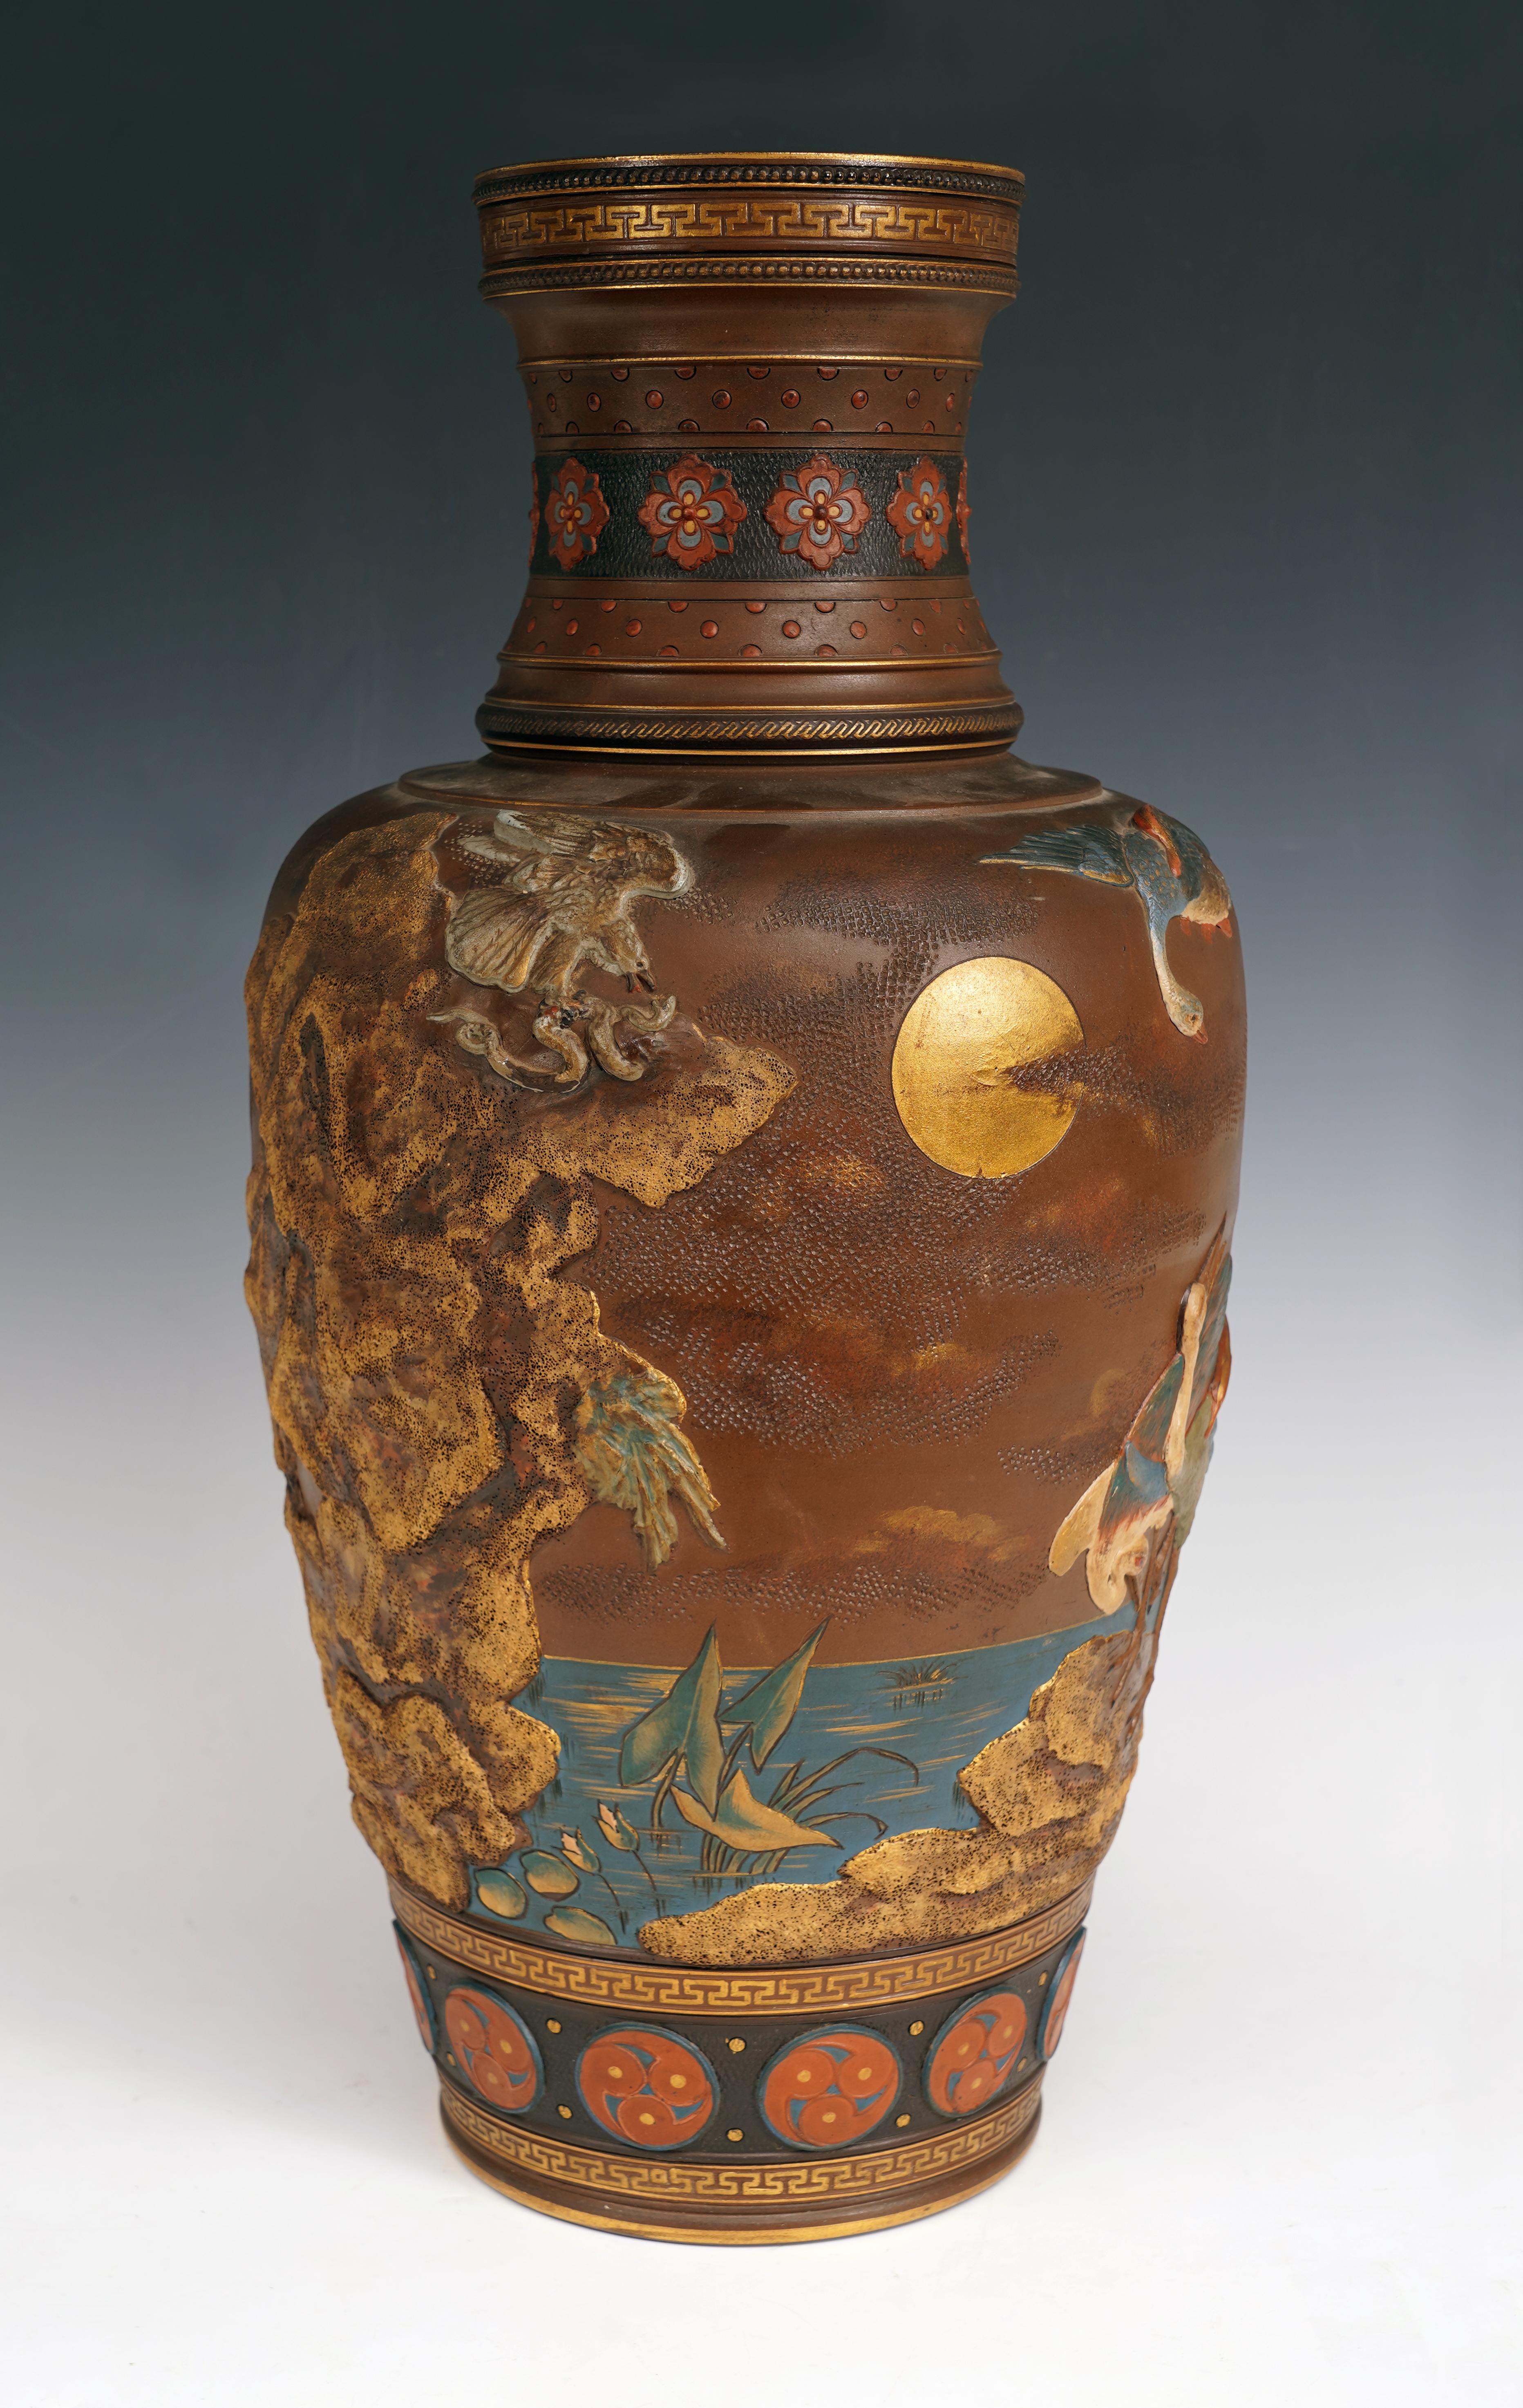 Japonisme Vase with Cranes by the Villeroy&Boch Manufacture, Mettlach Germany, Circa 1900 For Sale